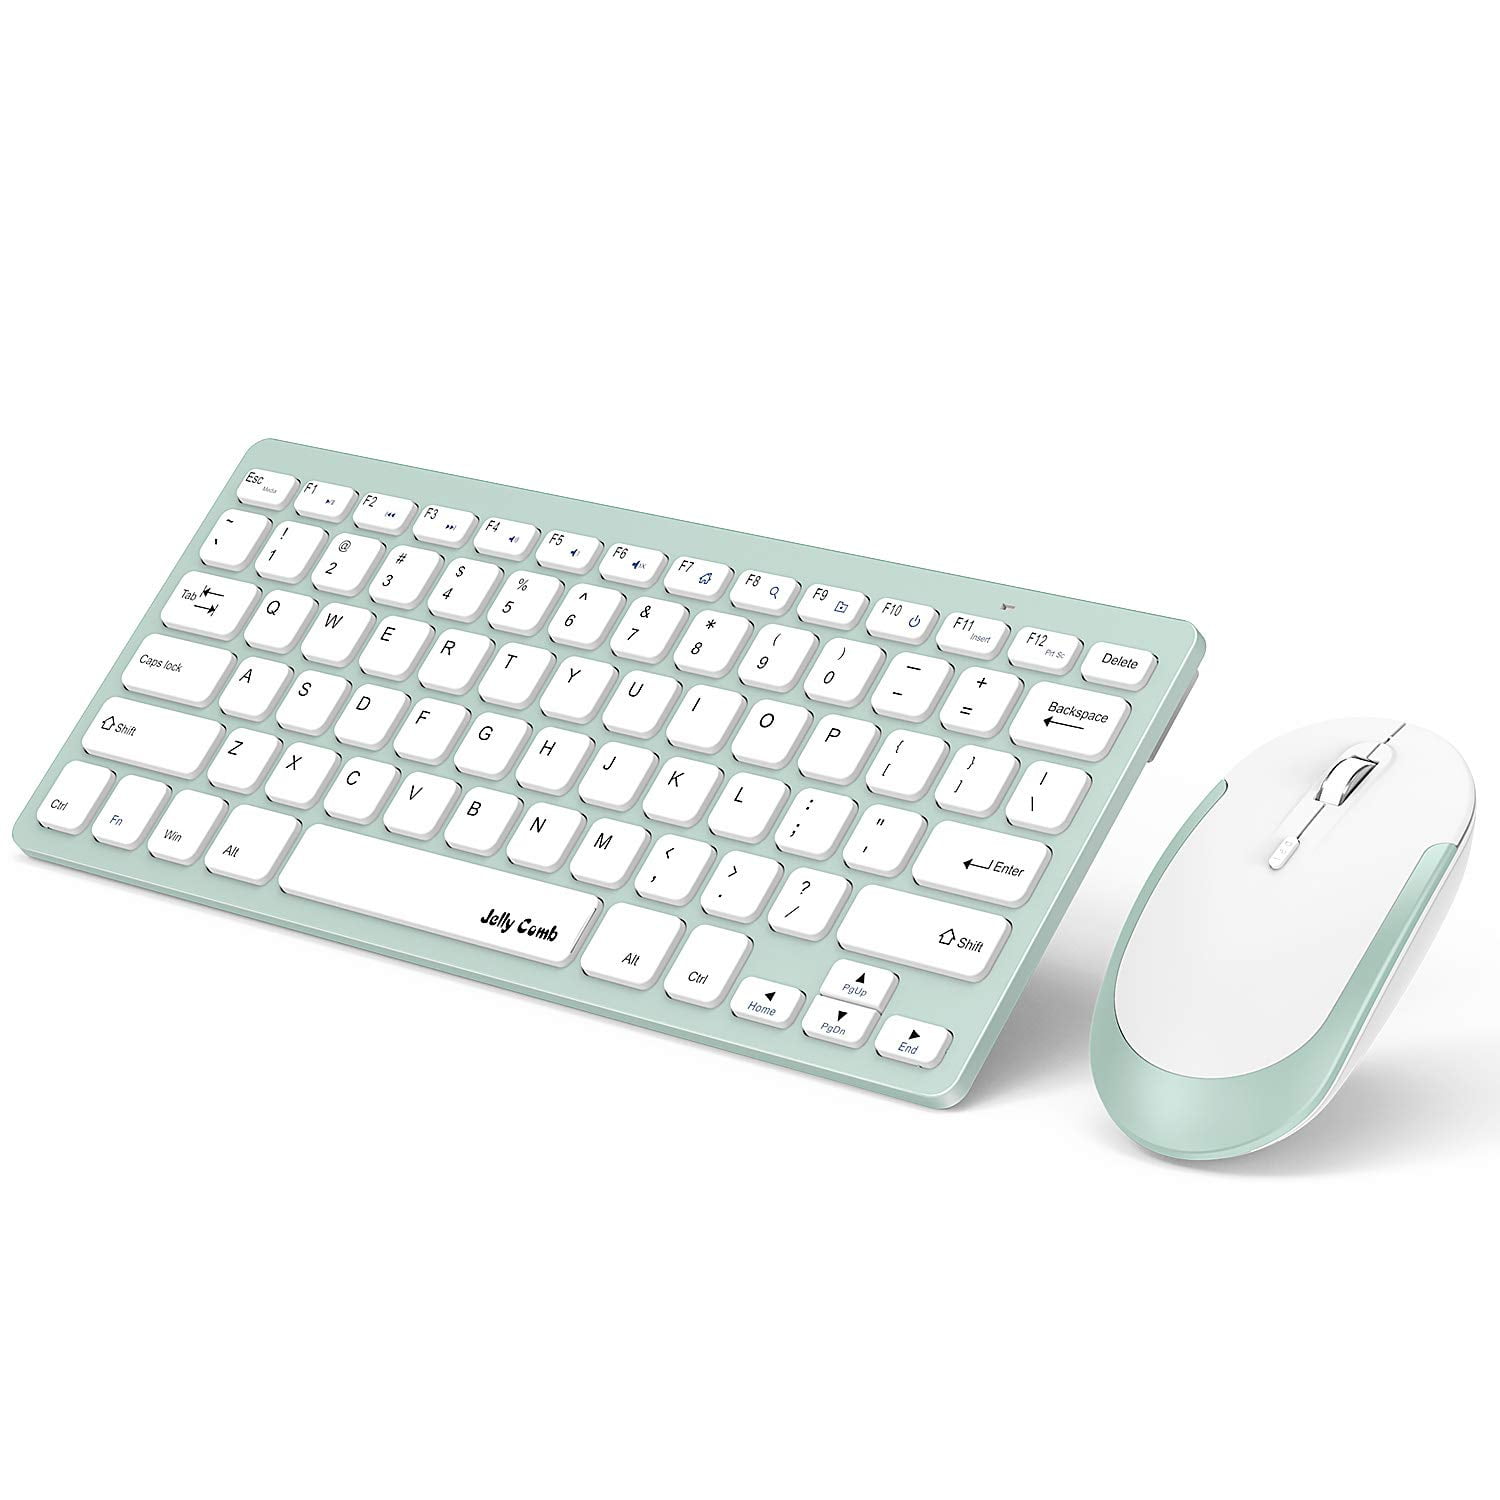 Laptops 2.4G Slim Full Size Keyboard Mouse Combo with Number Pad for PC Desktops Computer Mint Green Wireless Keyboard and Mouse Windows 